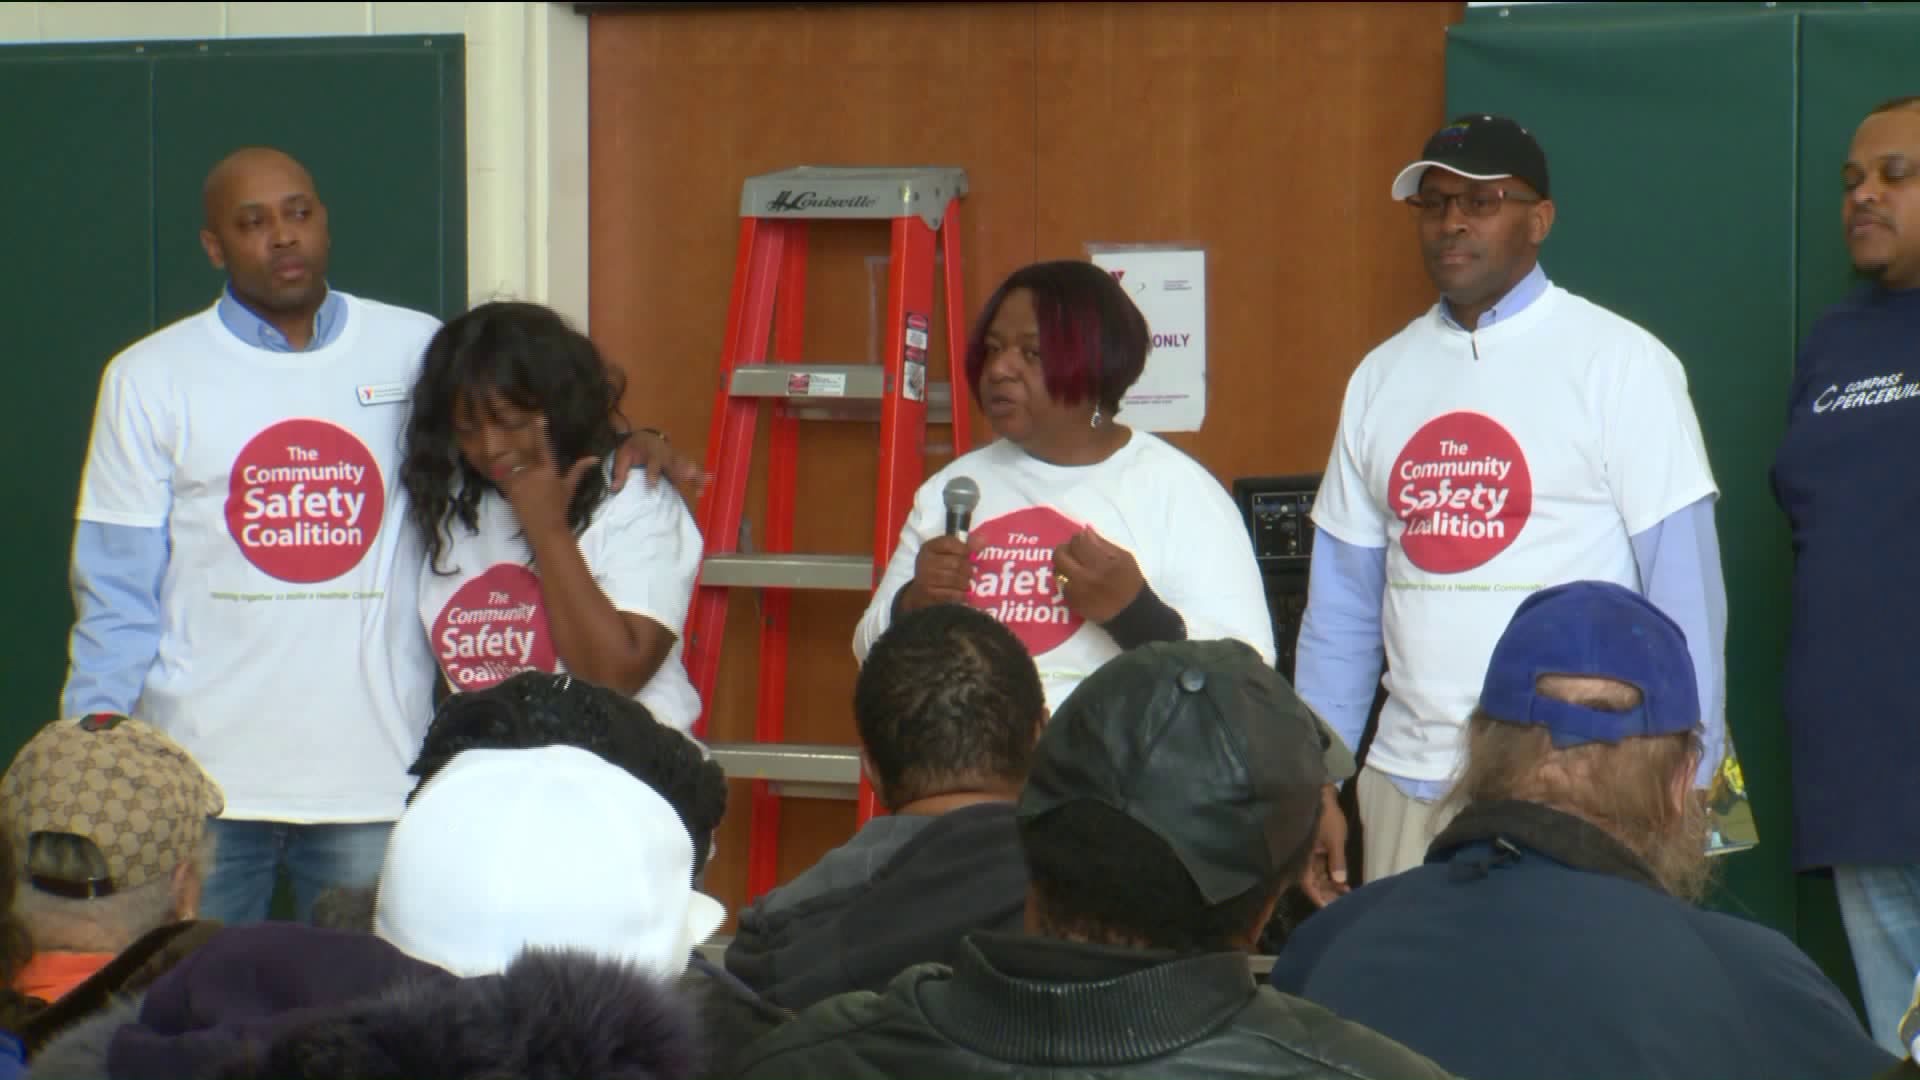 Newly formed safety coalition aims to decrease violence & trauma in Hartford